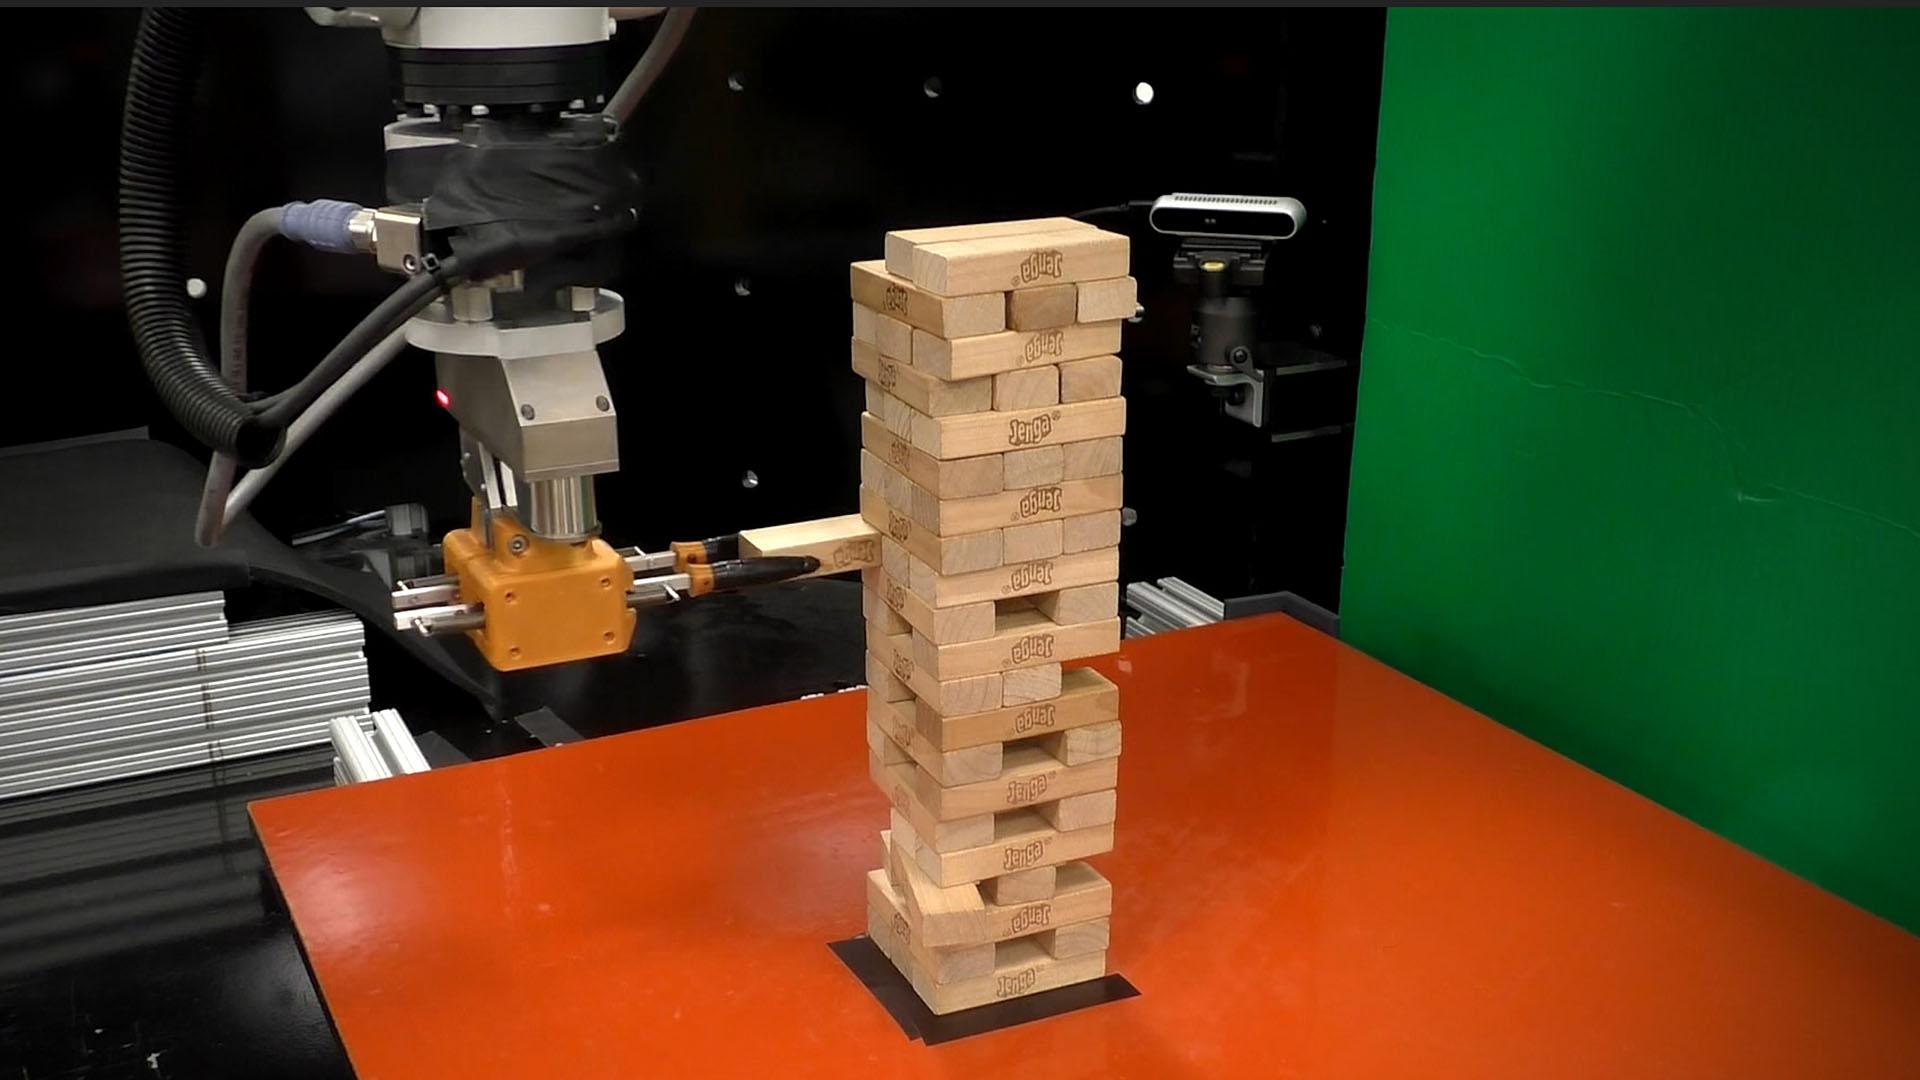 MIT Robot Learns How to Play Jenga